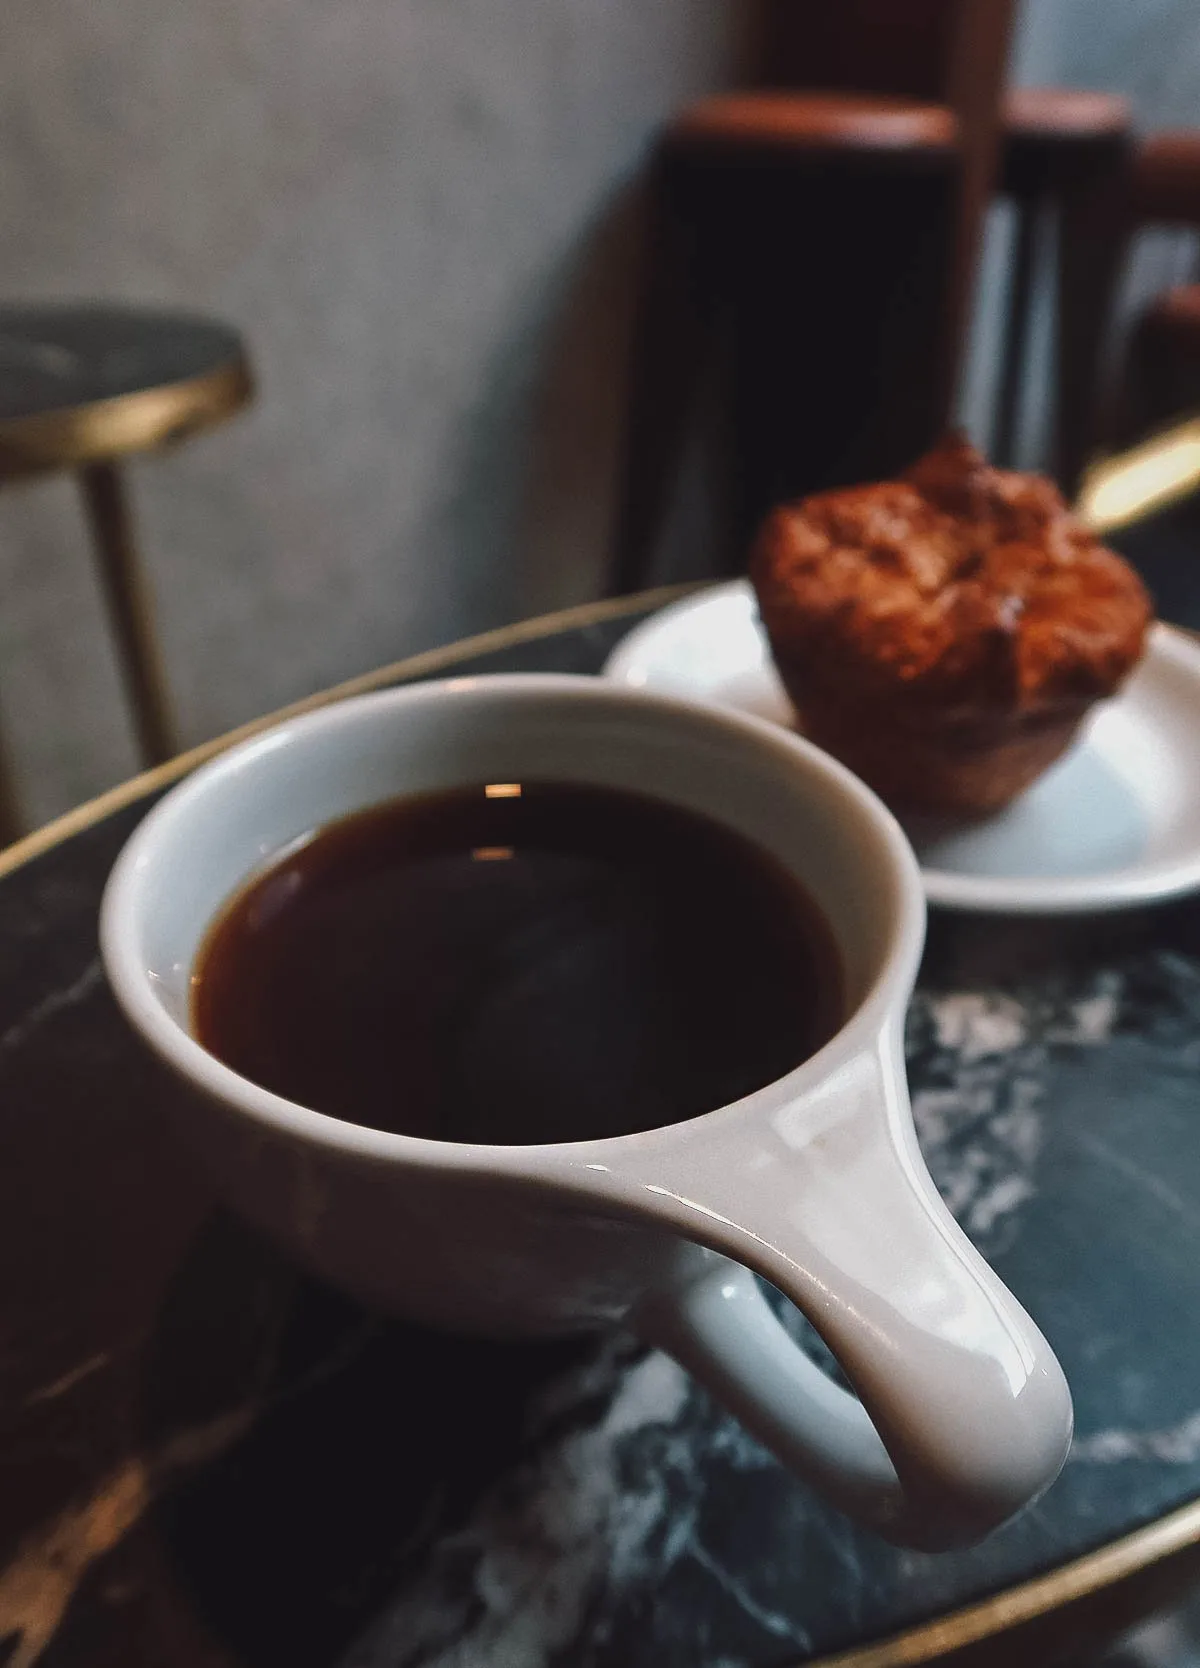 Coffee and kouign-amann from a cafe in Mexico City